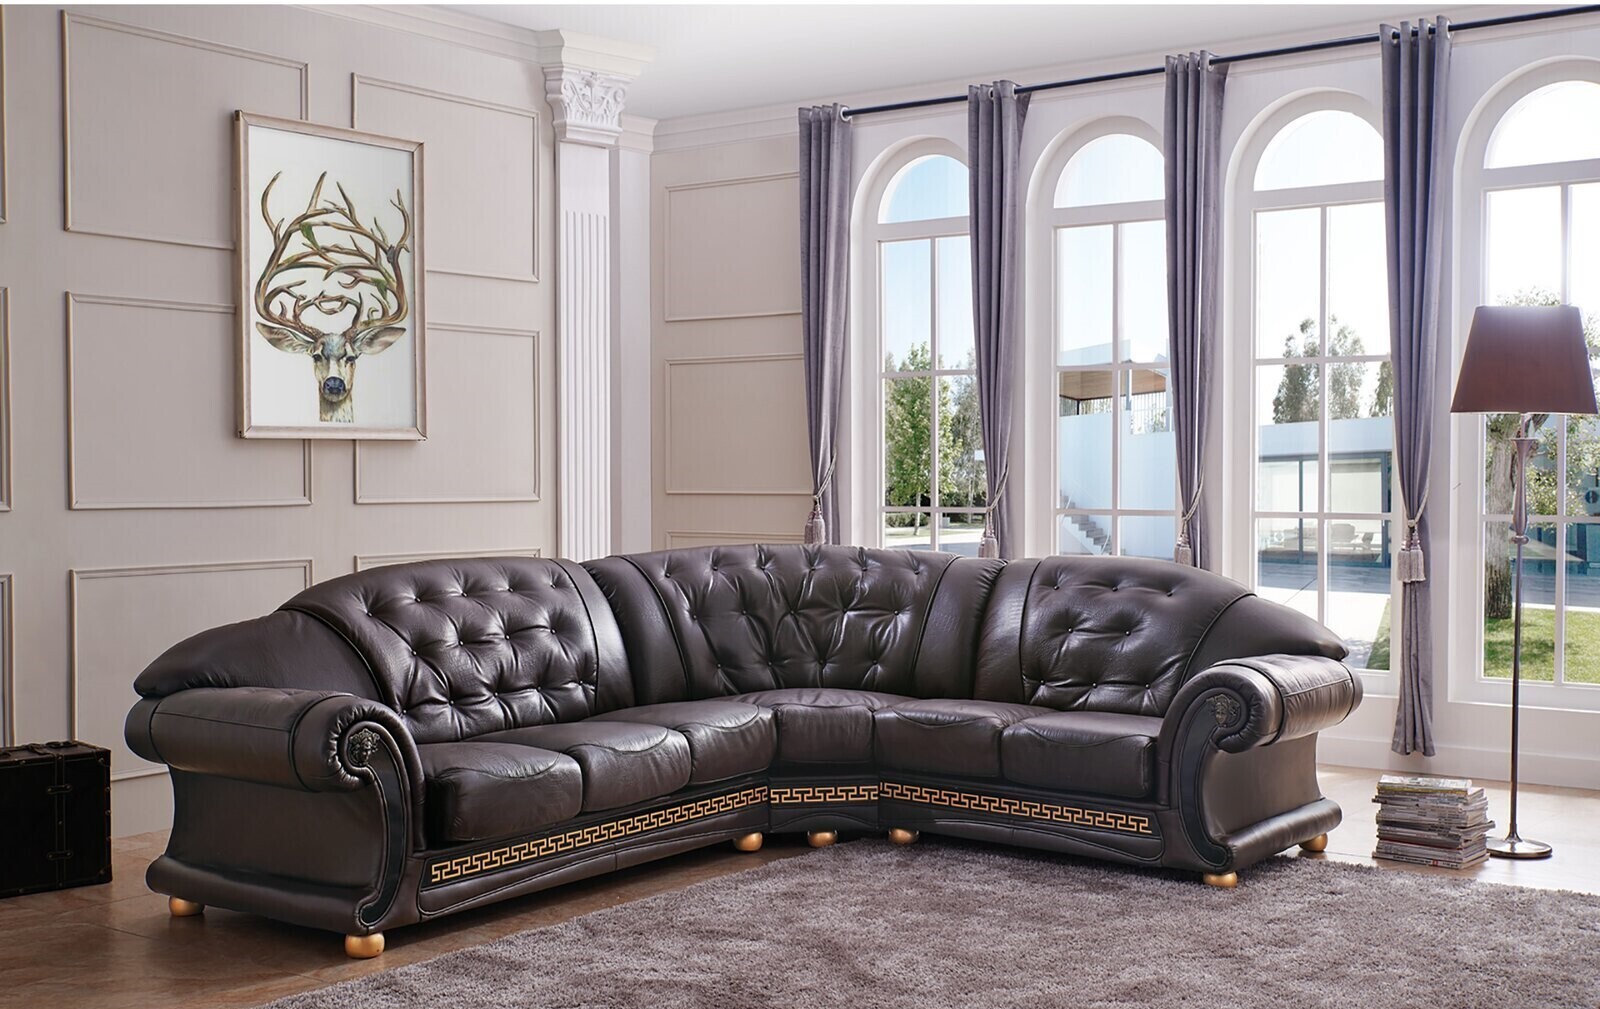 Curved Leather Sofa with Wide Tufted Backing